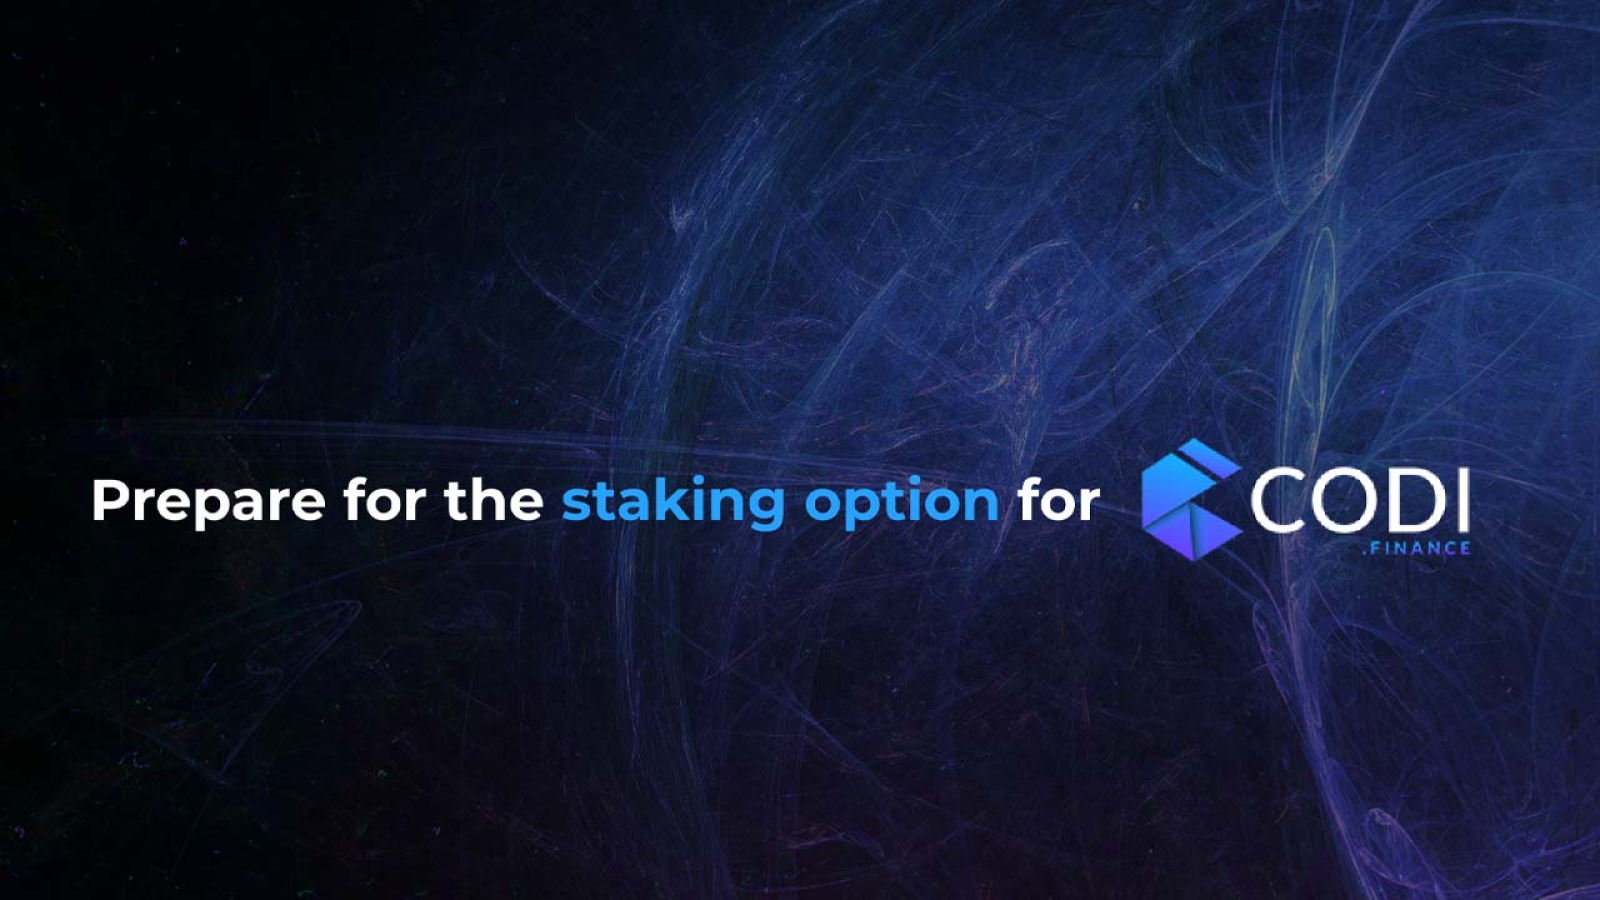 CODI Announces Upcoming Staking Features As It Accelerate Plans To Become Fully Operational